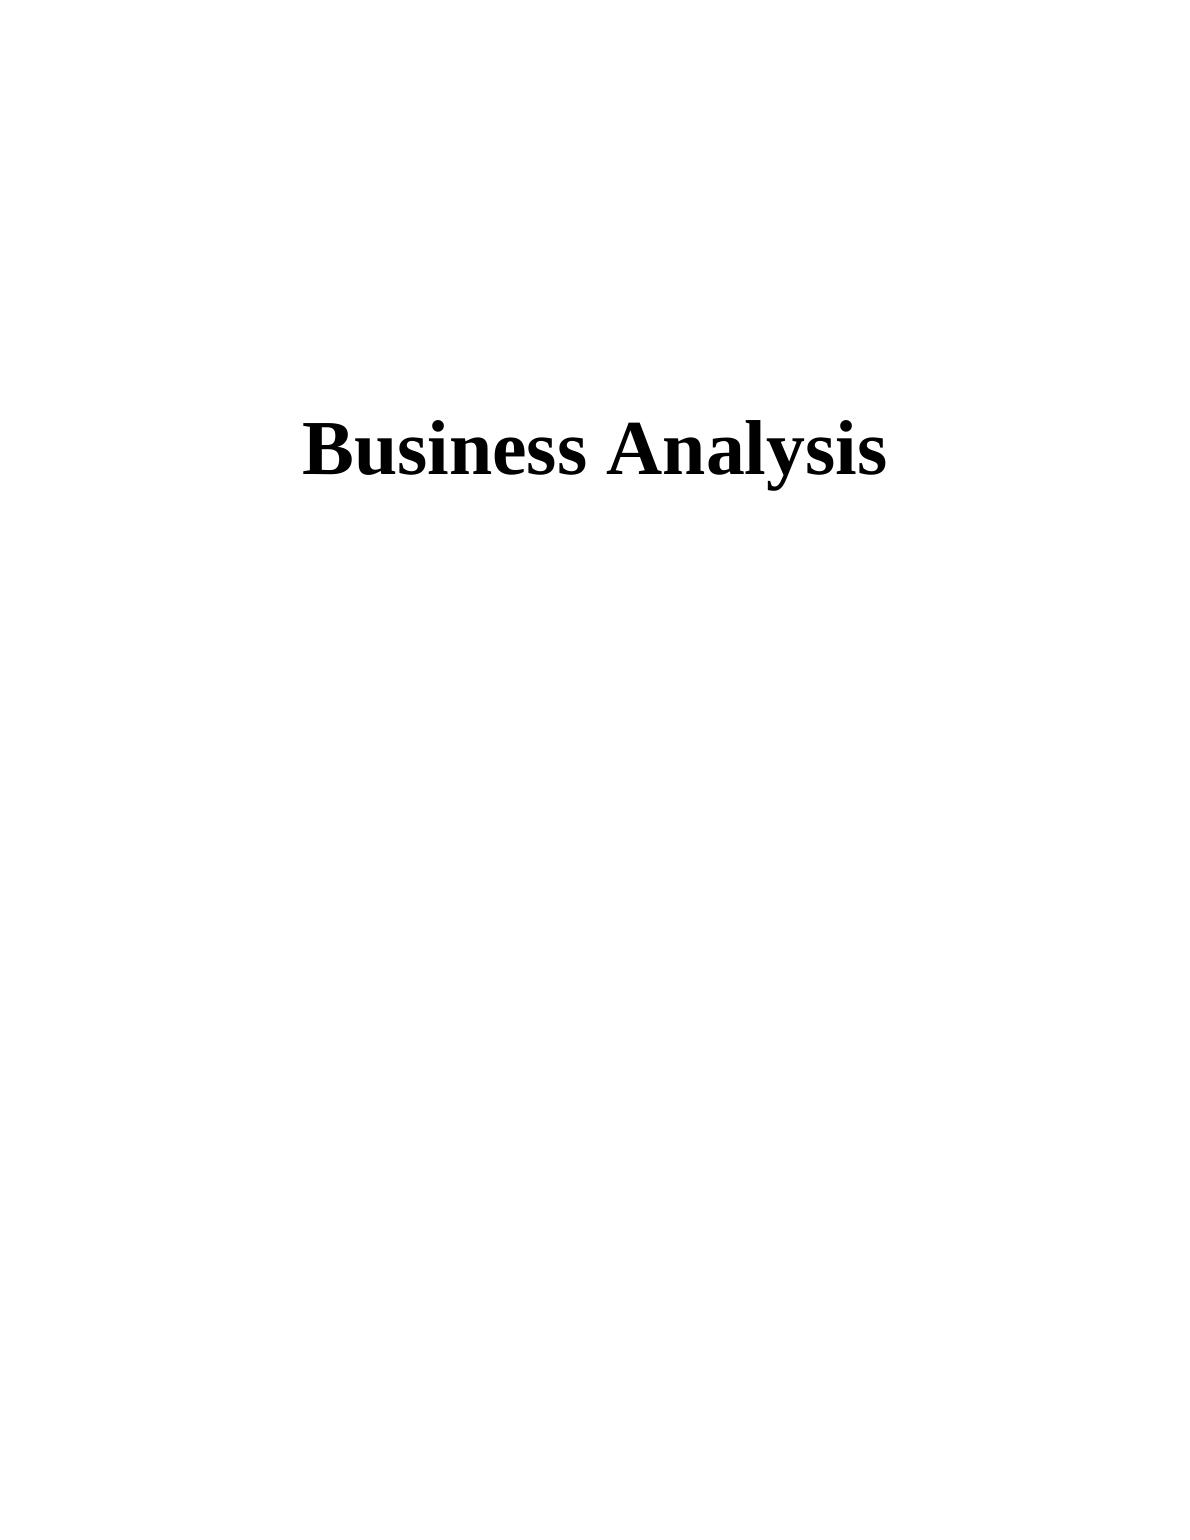 Business Analysis: Significance of Population and Sampling Techniques_1